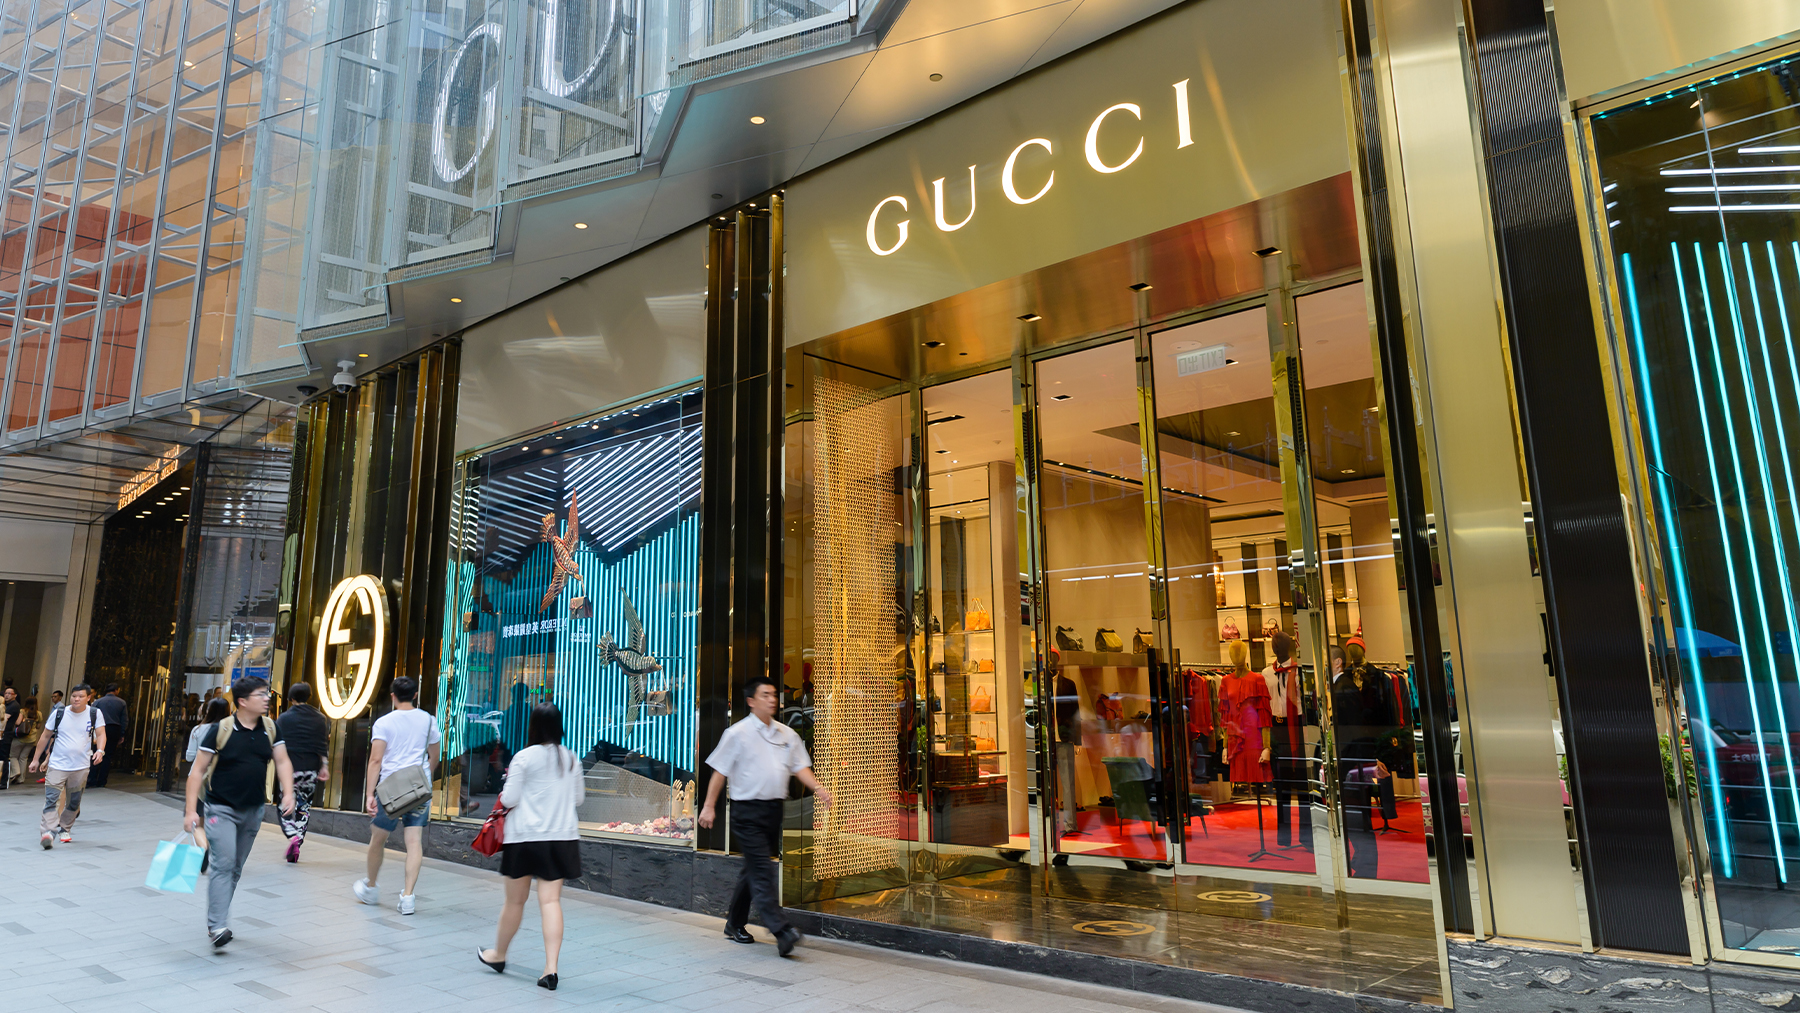 Gucci Could Be Kering's Greatest Strength and Liability in China